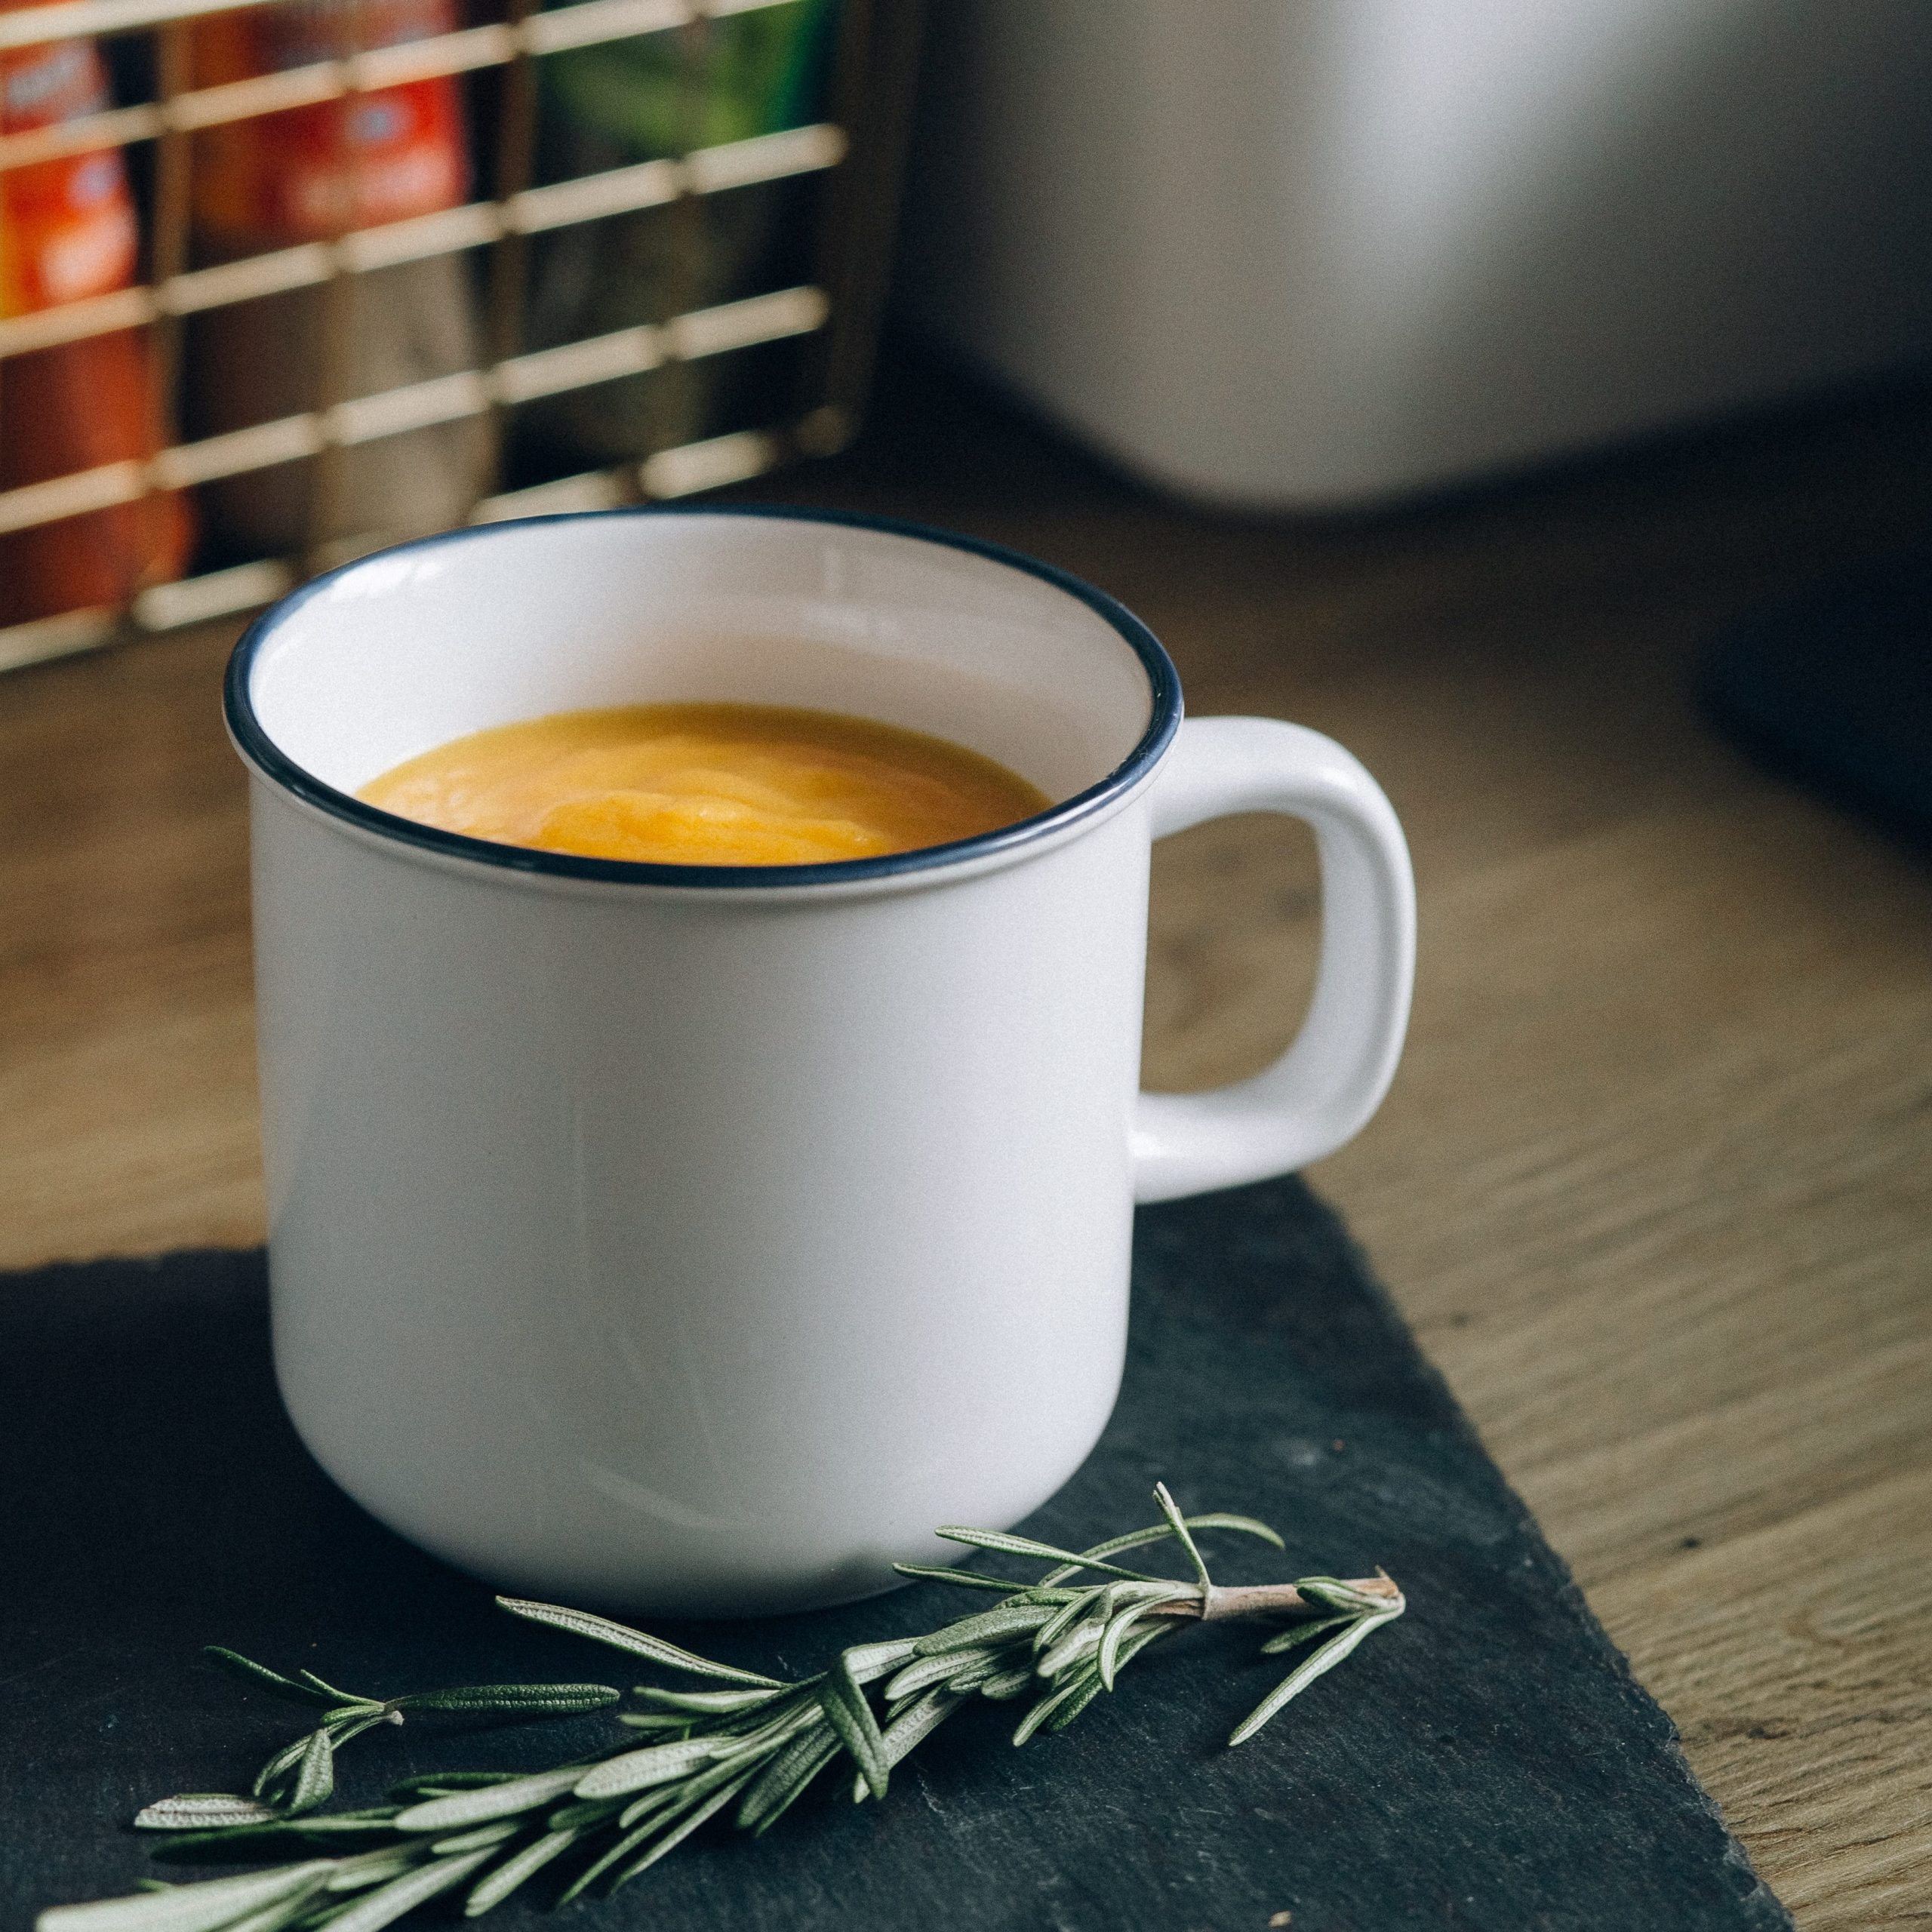 Pumpkin soup in a white enamel mugs sits on a wooden counter